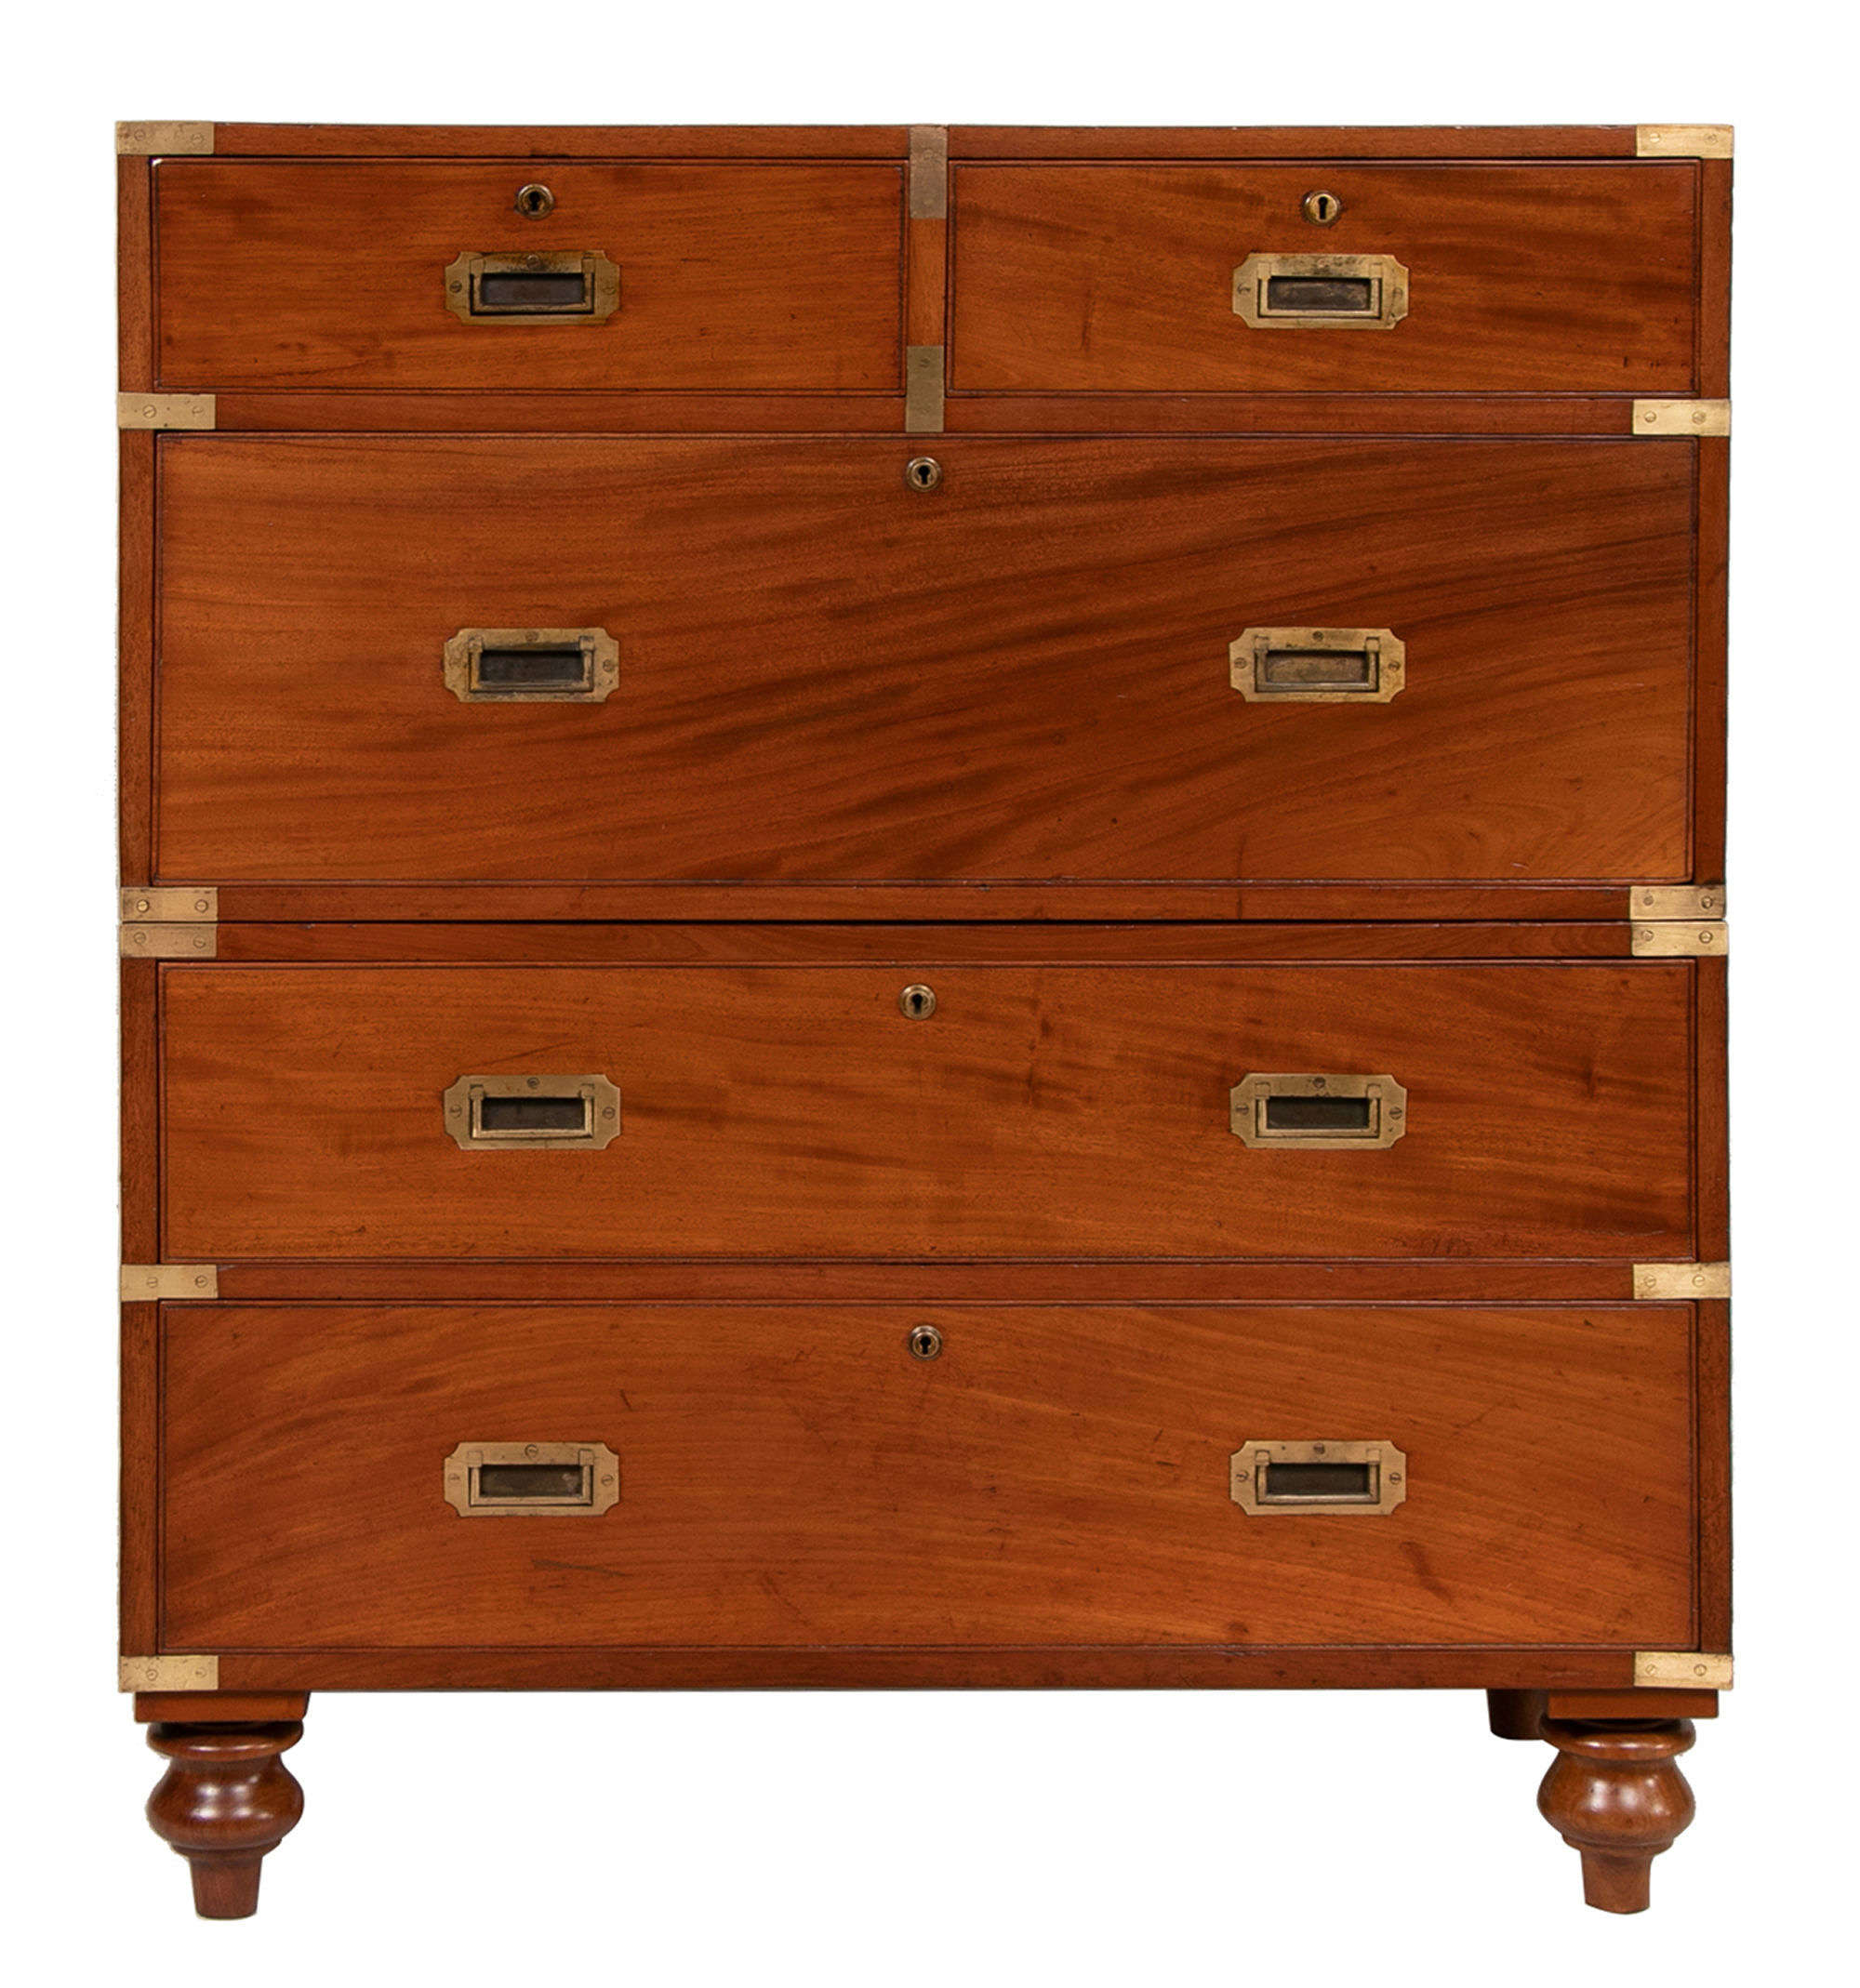 A Superb 19th Century Military Mahogany campaign chest on chest